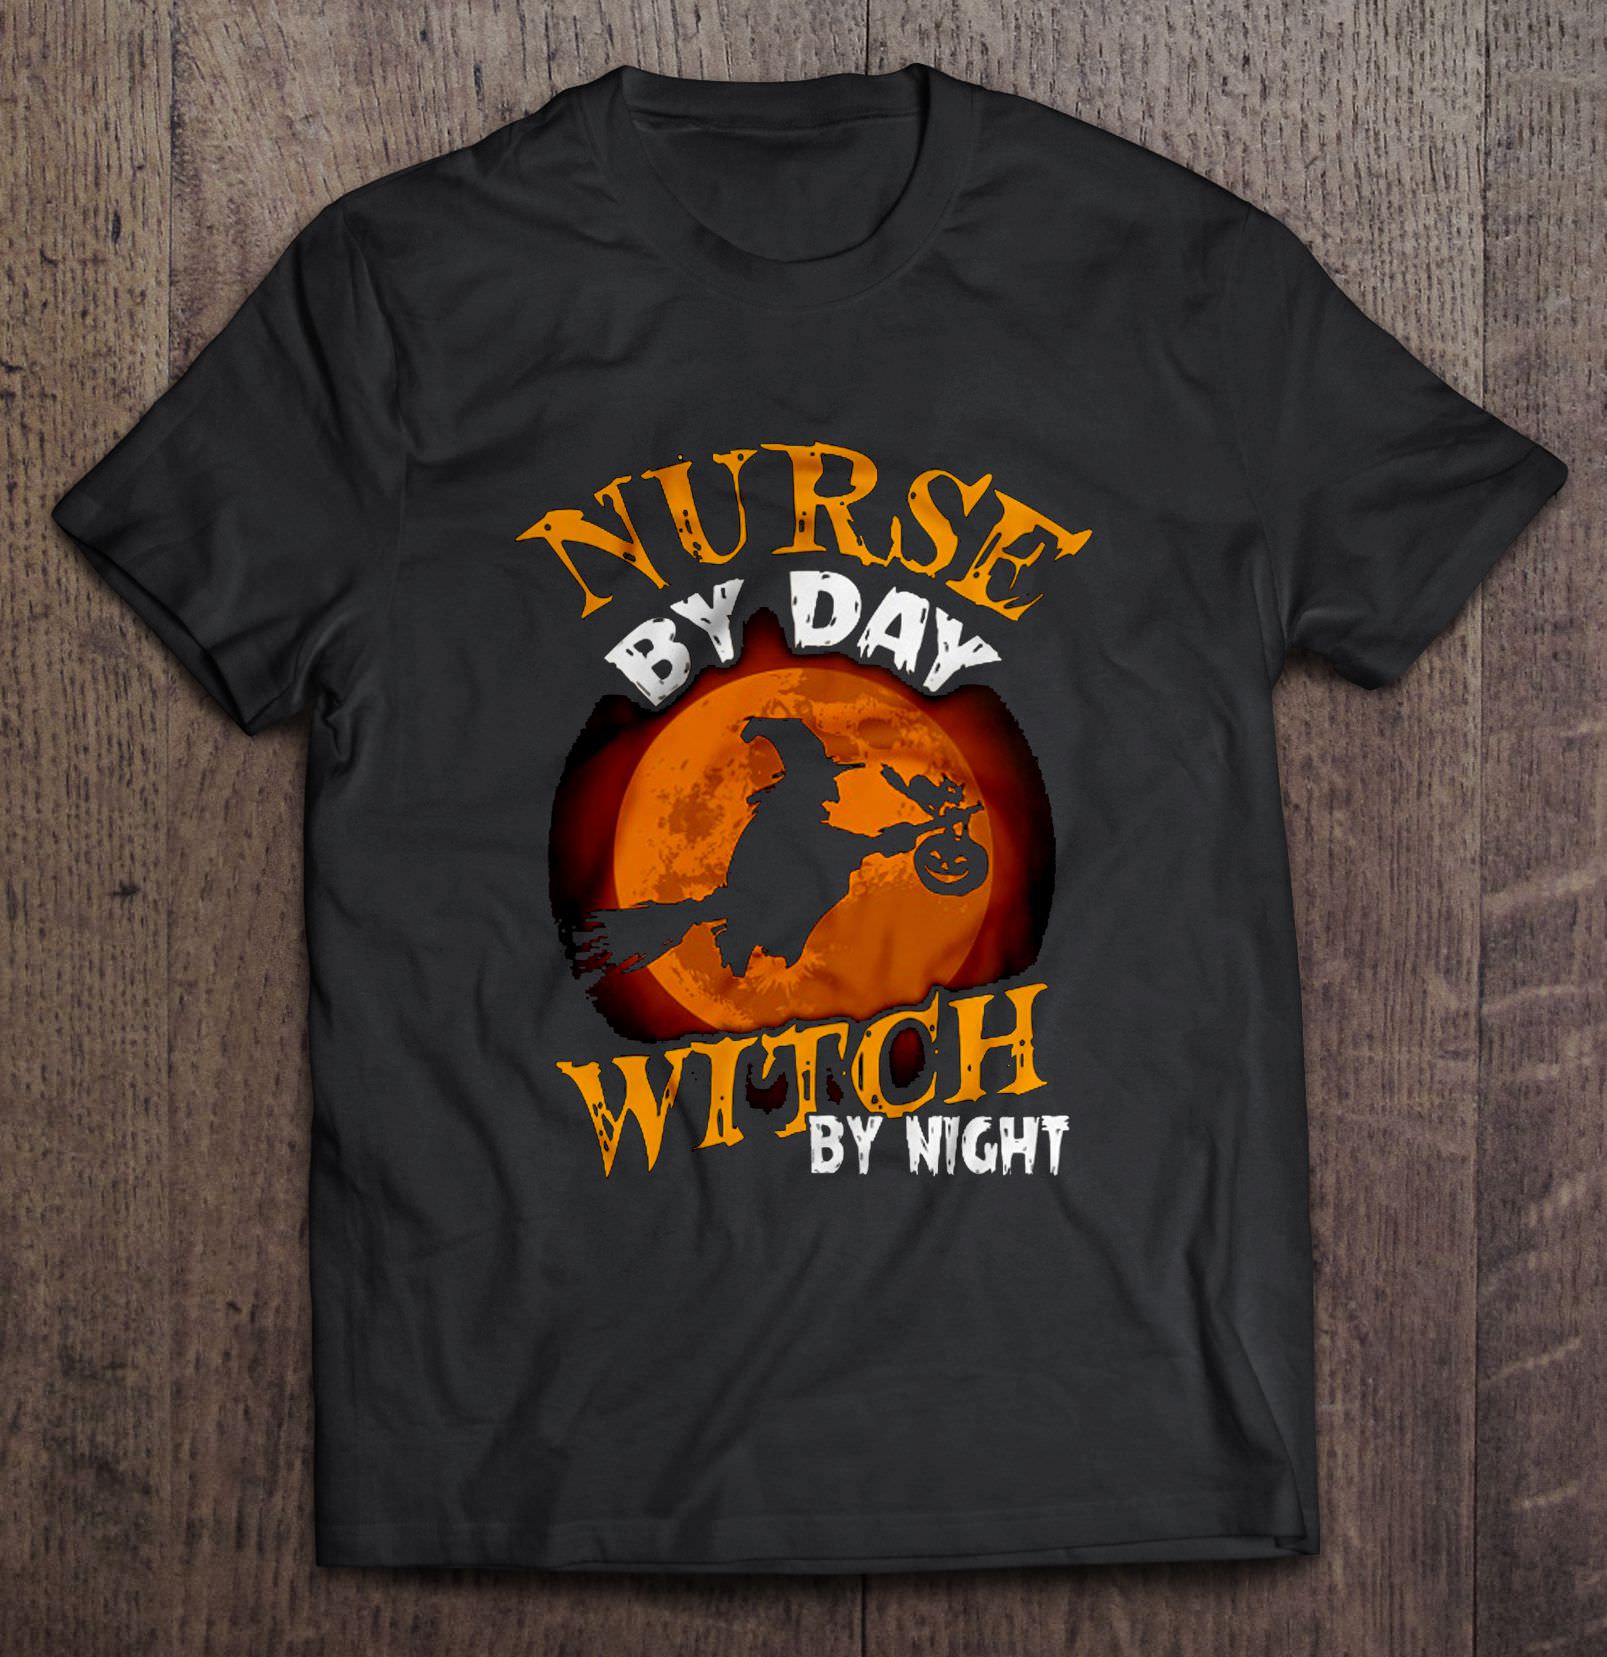 Nurse By Day Witch By Night – Halloween Moon V-Neck T-Shirt